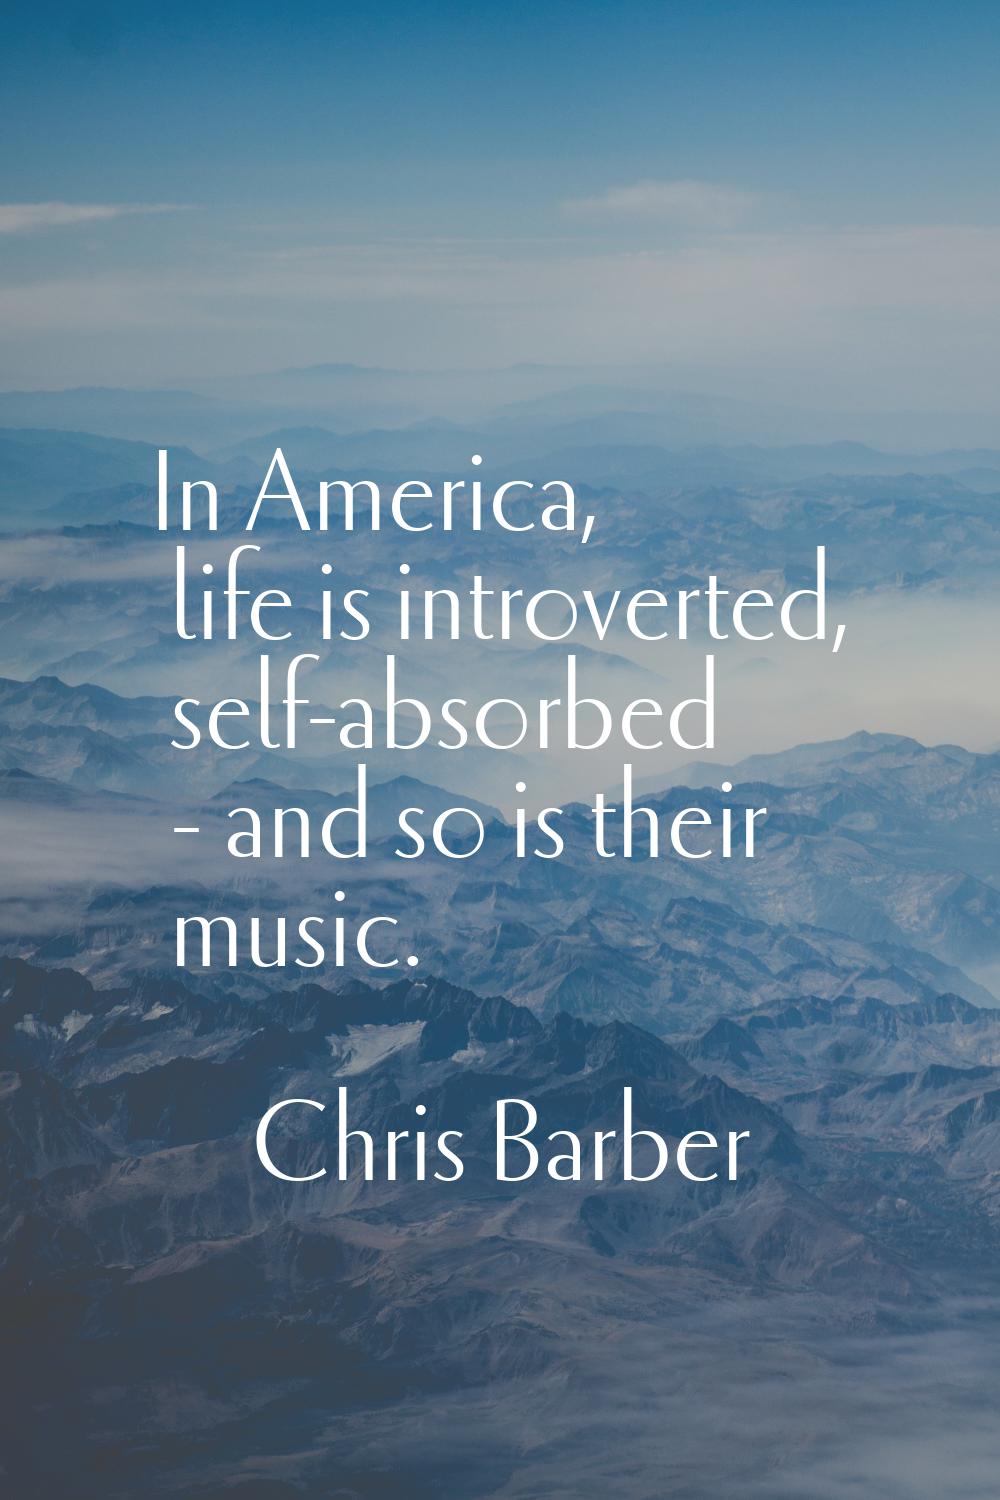 In America, life is introverted, self-absorbed - and so is their music.